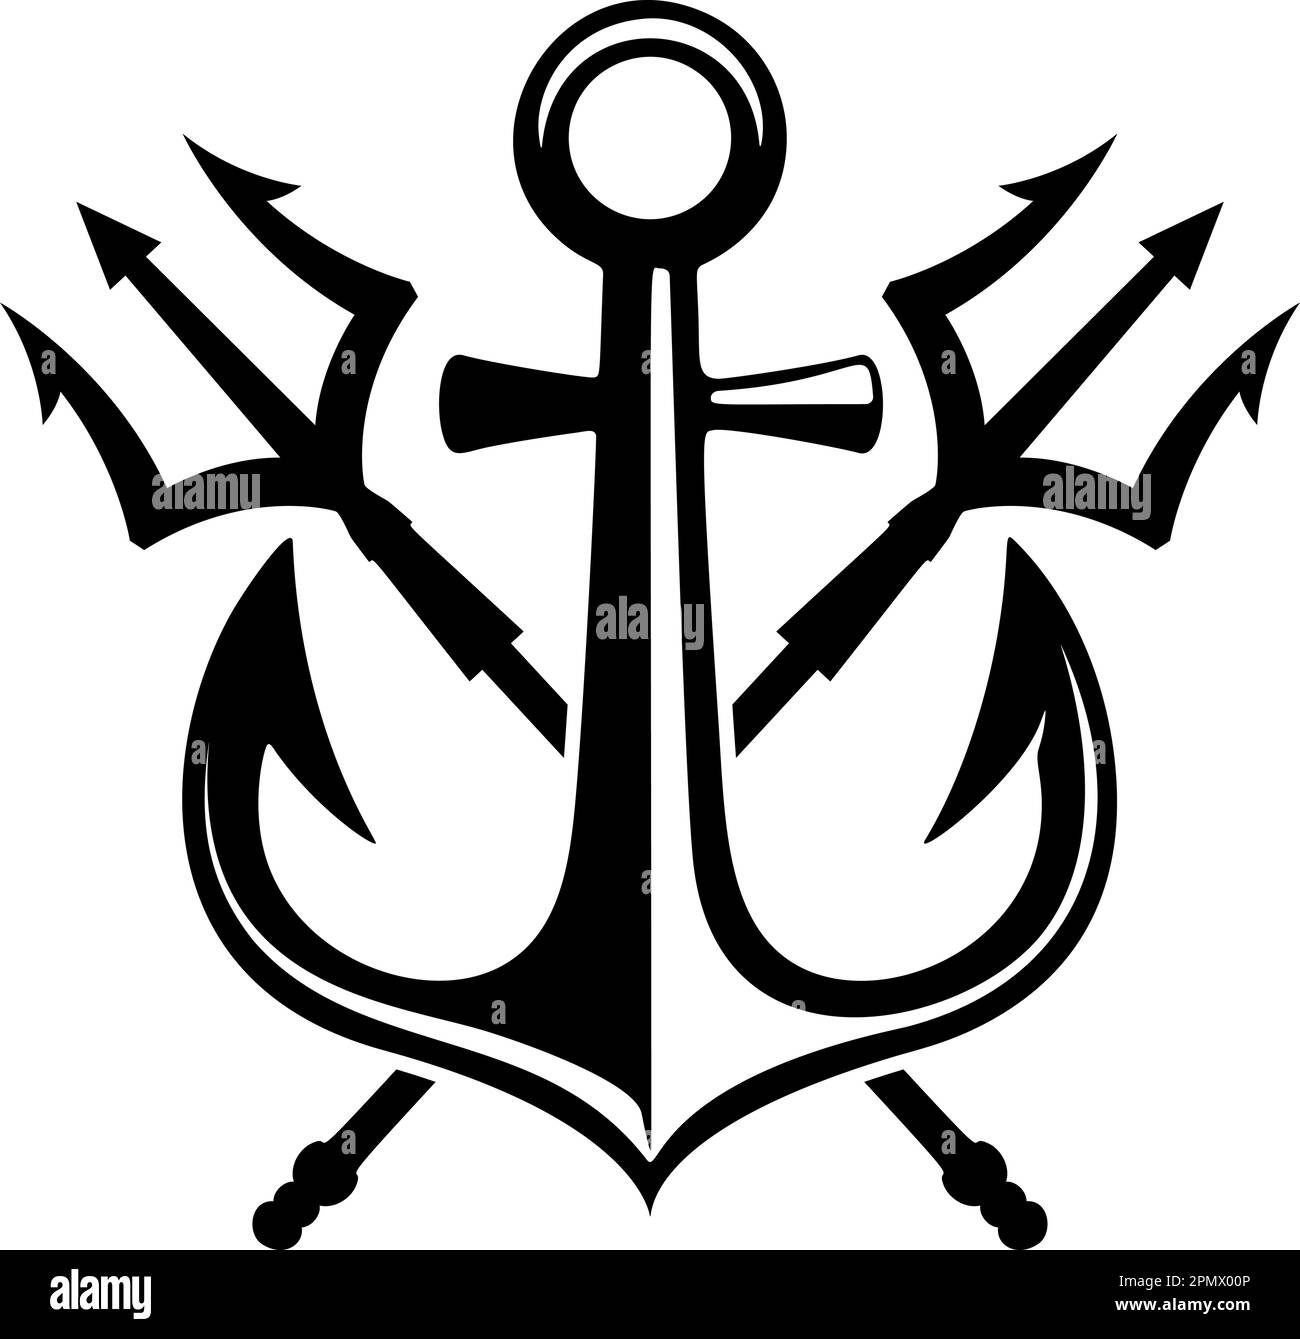 Illustration of sea anchor with crossed tridents. Design element for logo, sign, emblem. Vector illustration, Illustration of sea anchor with crossed Stock Vector